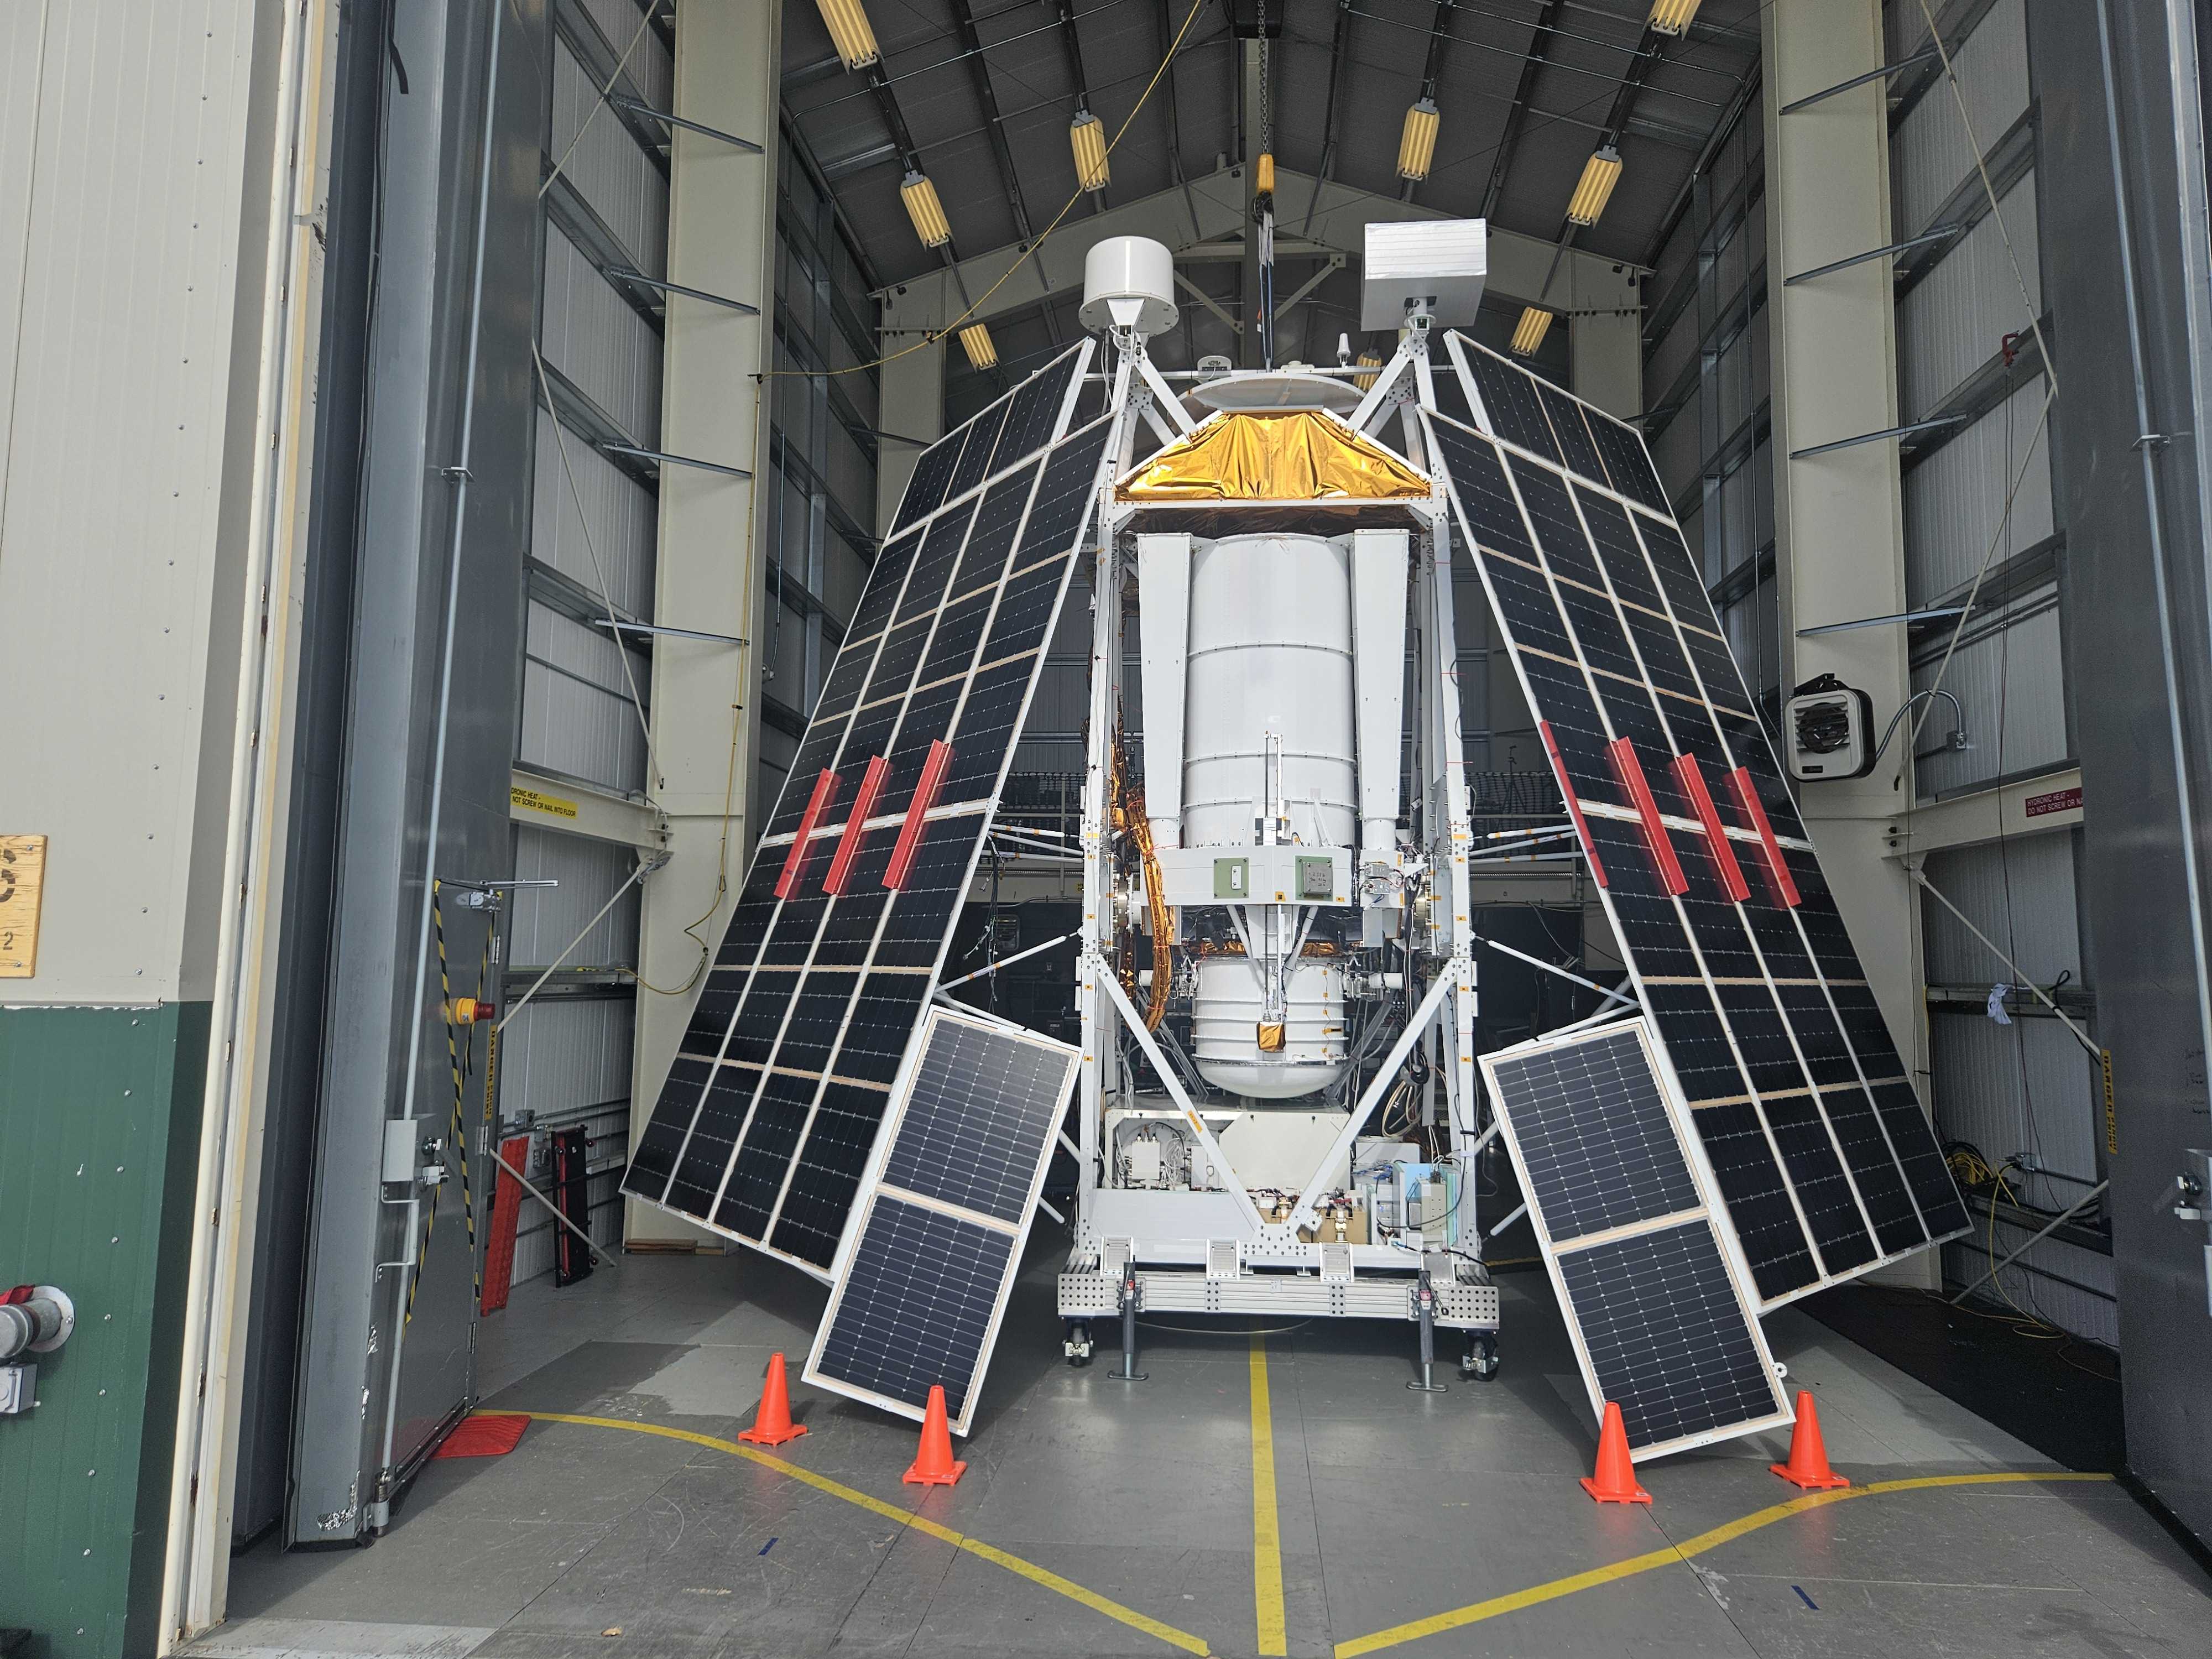 A photo of the GUSTO telescope and gondola shows it inside a hangar with solar arrays mounted. Four orange traffic cones sit in front of the structure